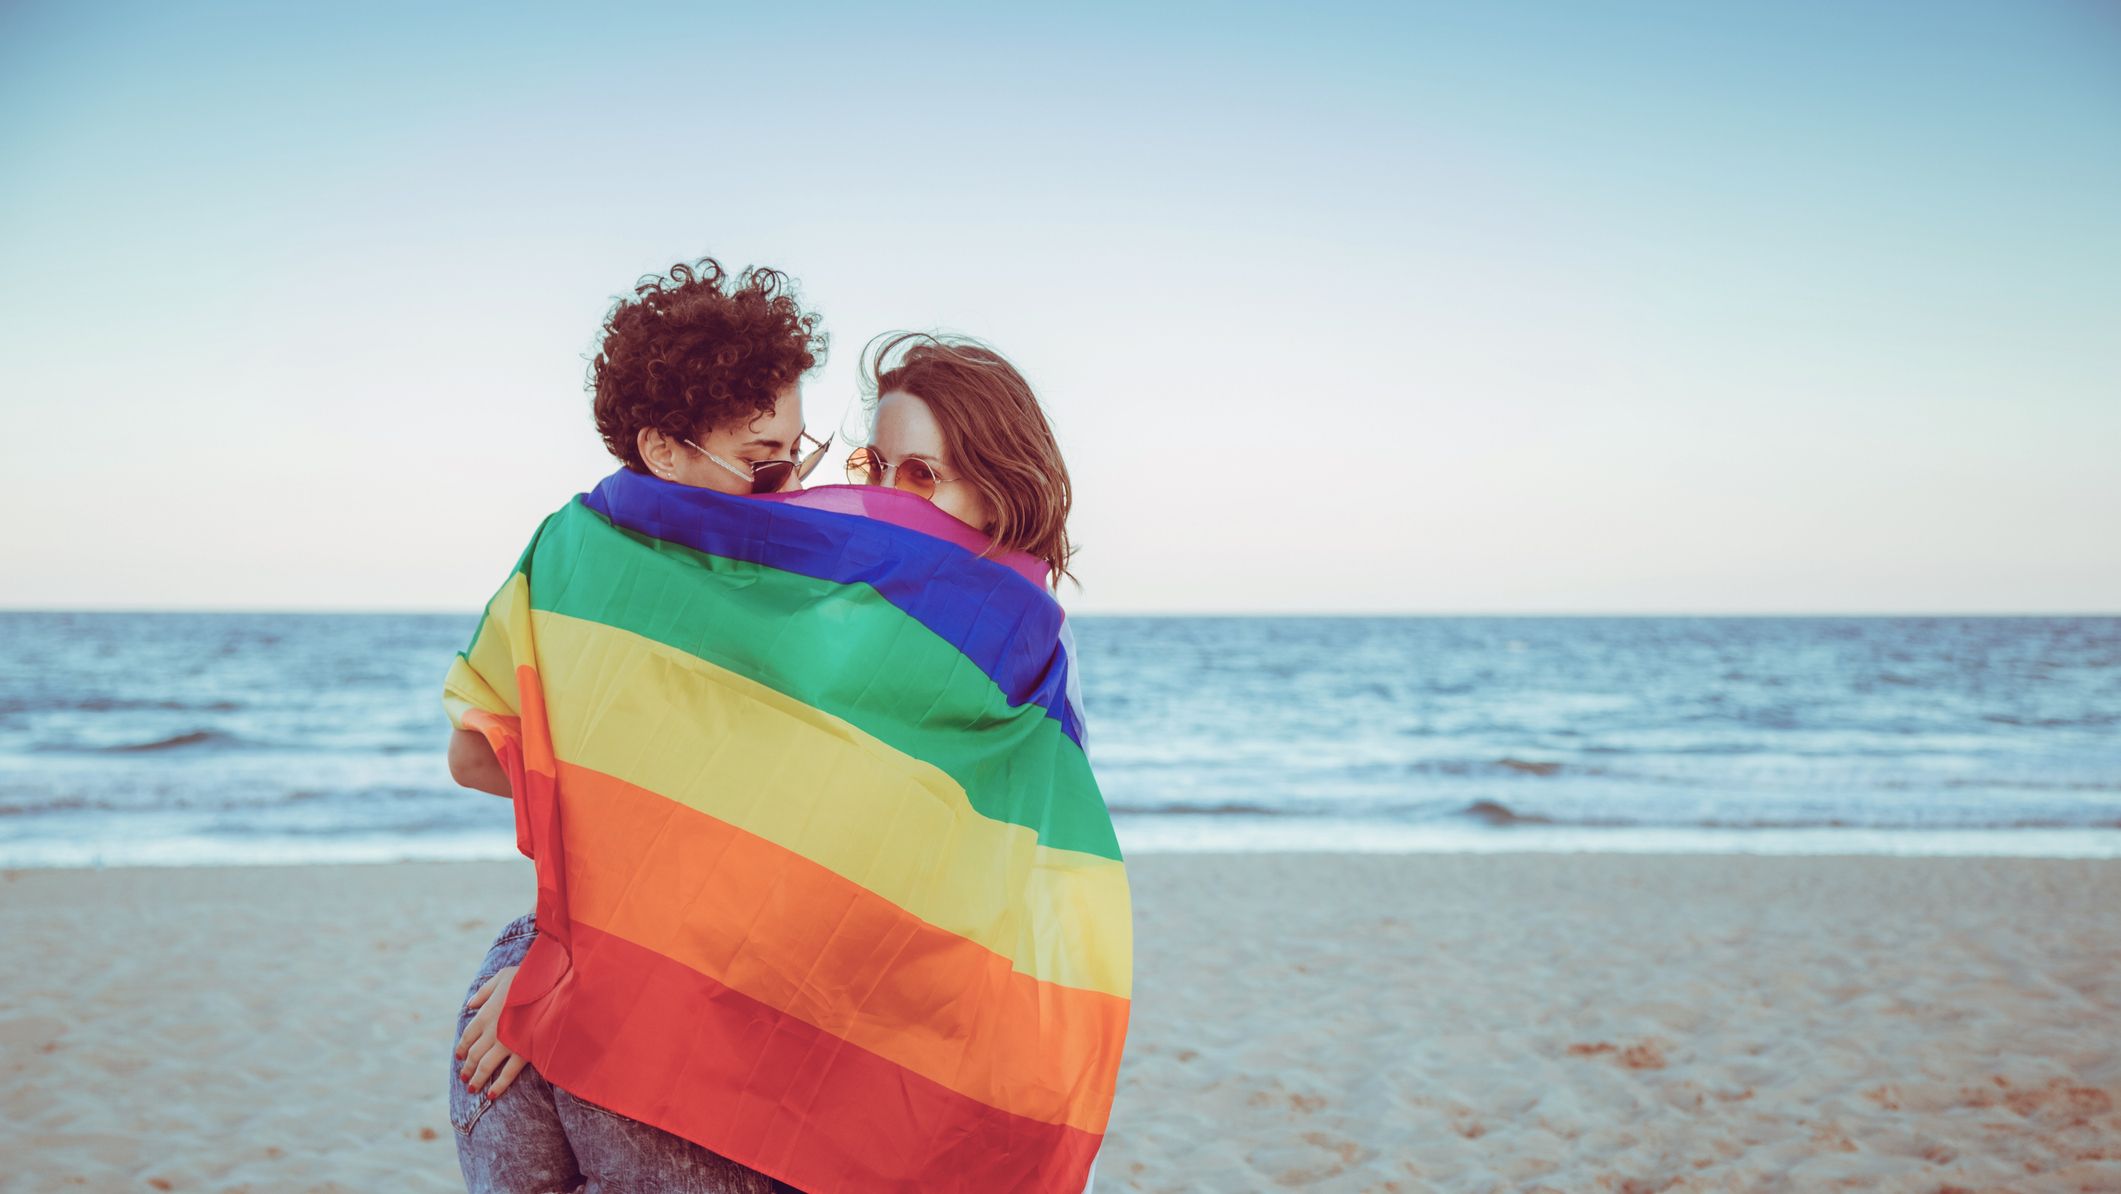 Hidden Cam Nude Beach Couples - Am I Bisexual?' 10 Bisexuality Signs, According To Experts